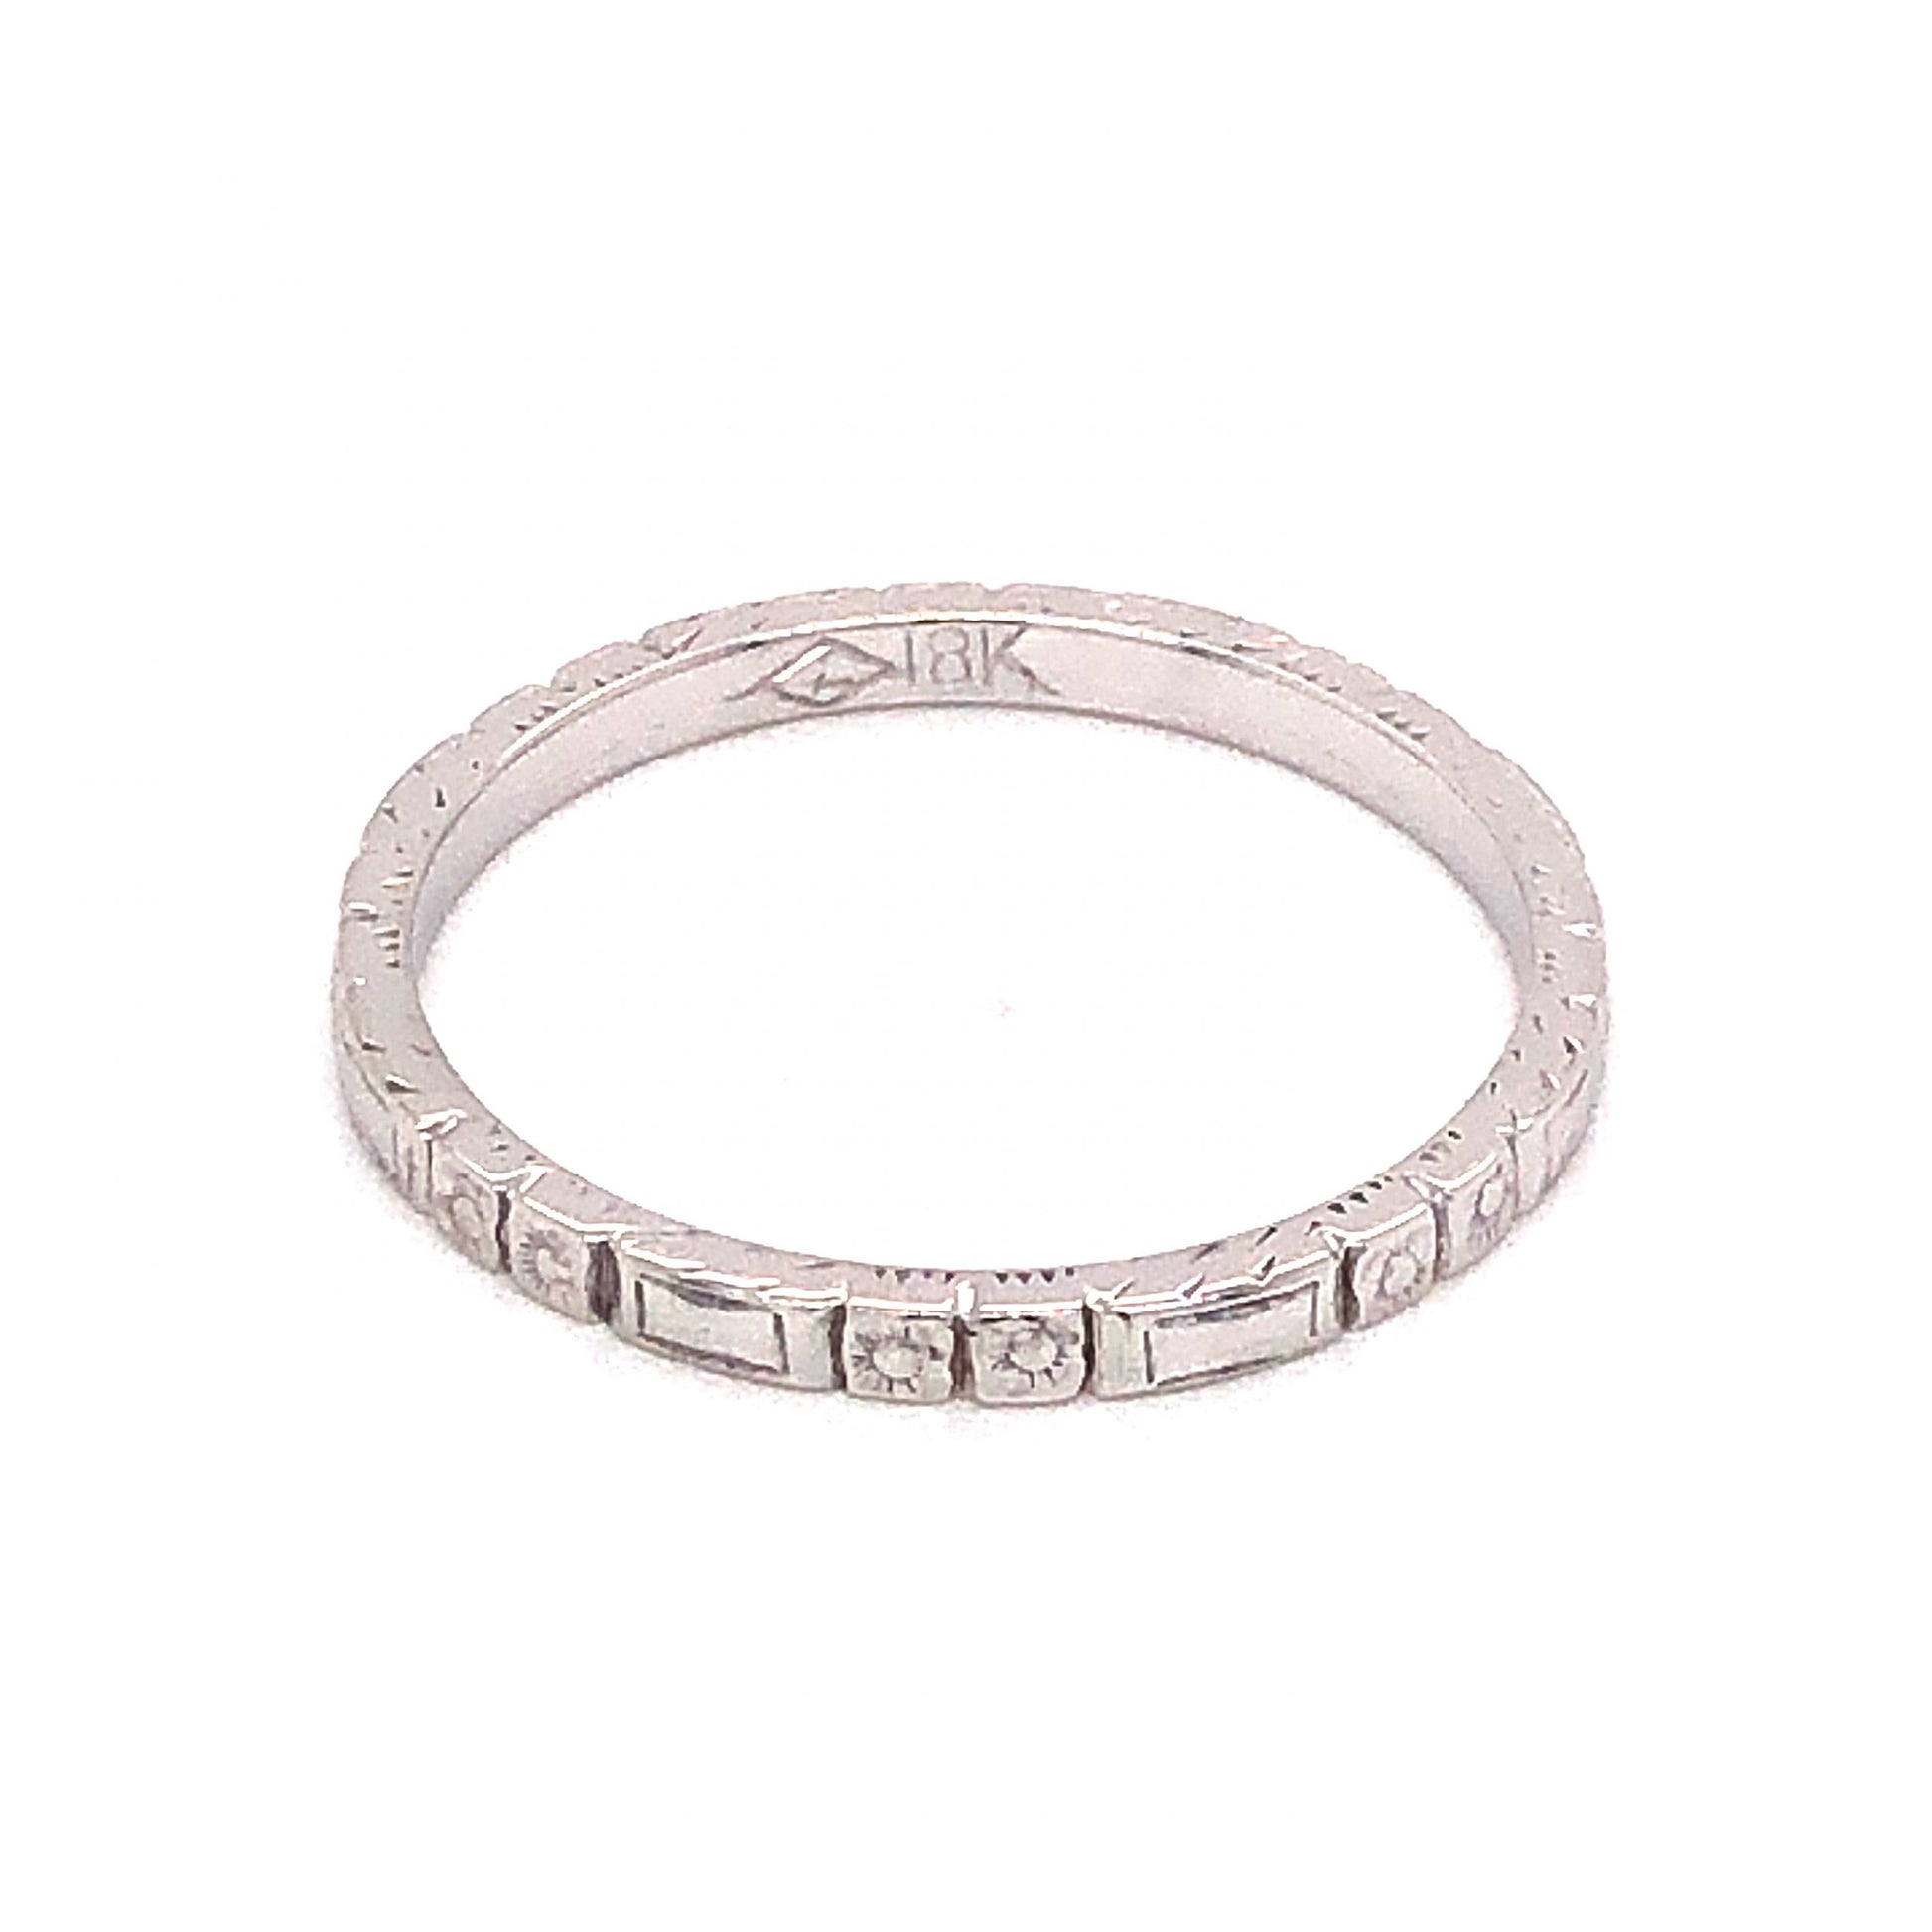 1.64mm Engraved Art Deco Wedding Band in 18k White Gold